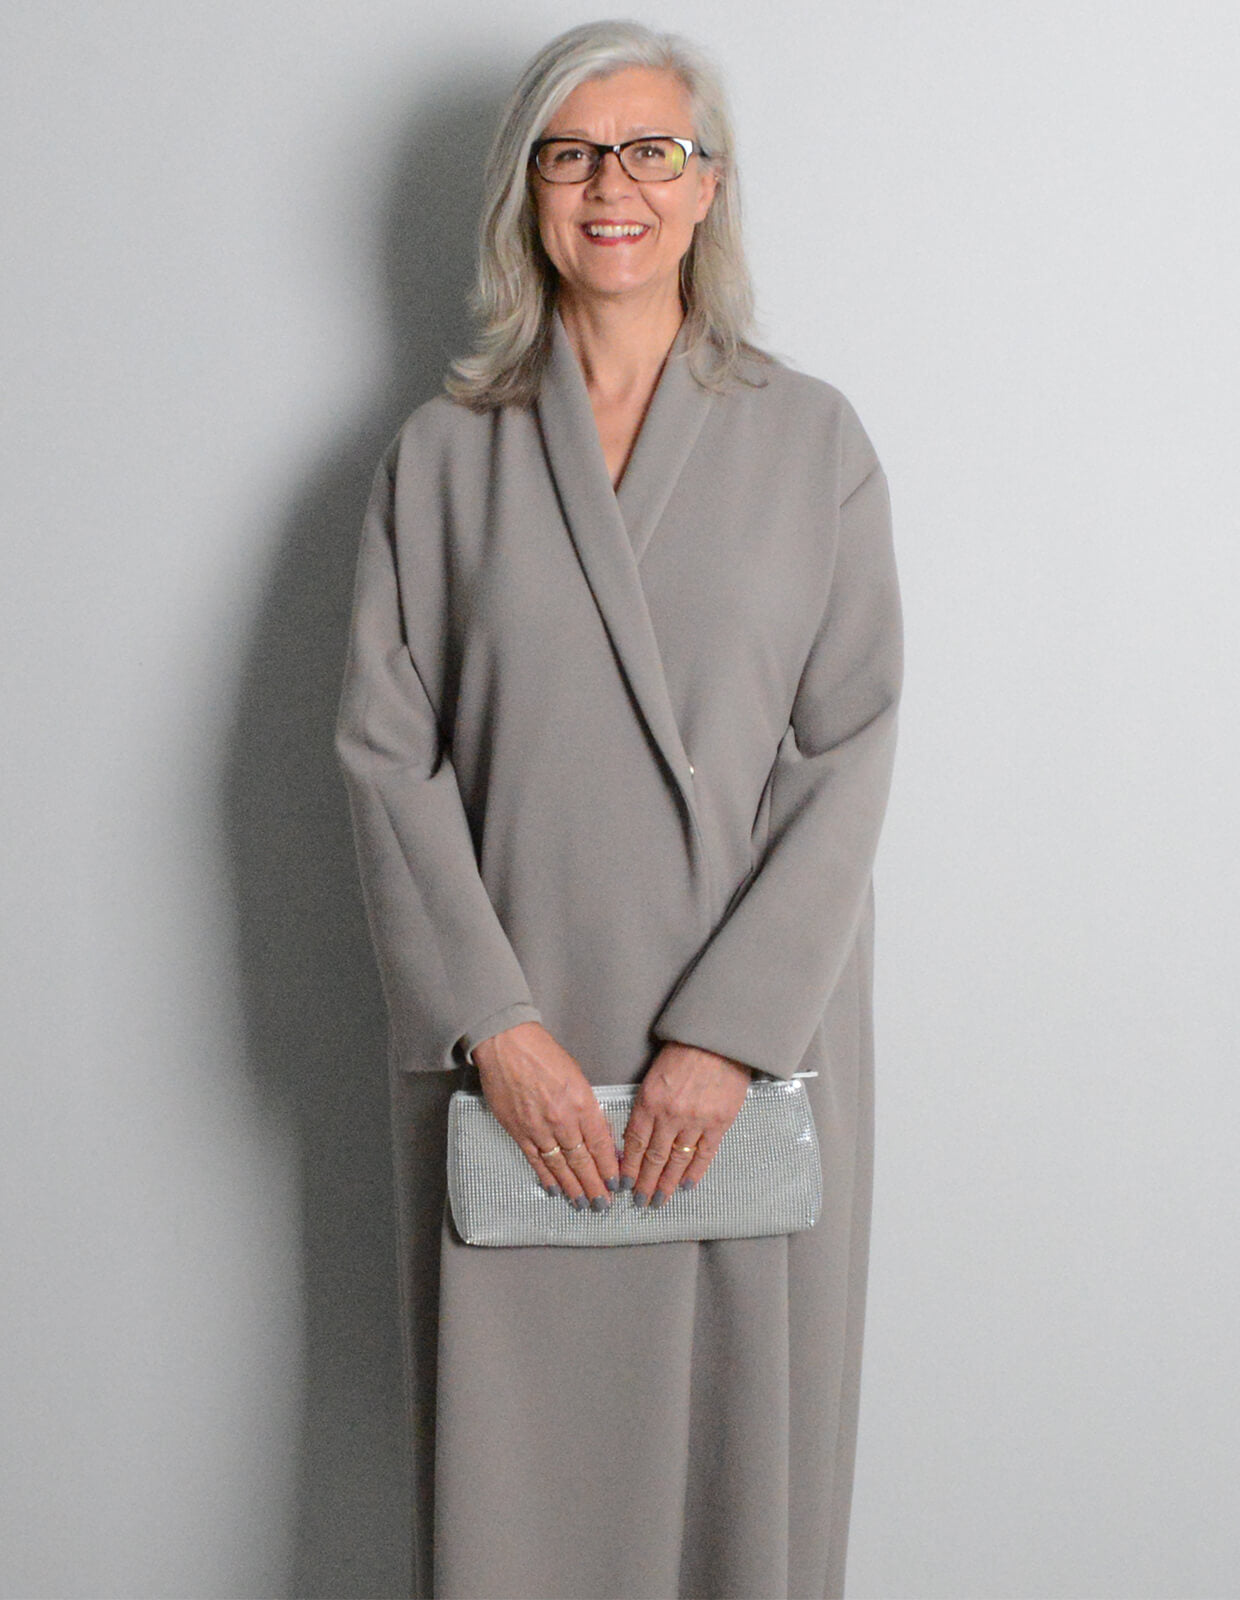 Woman wearing the Shawl Collar Coat sewing pattern from The Maker's Atelier on The Fold Line. A coat pattern made in melton or felted wool fabrics, featuring a raw edge, unlined, shawl collar, full length sleeve, midi length, single snap closure, relaxed 